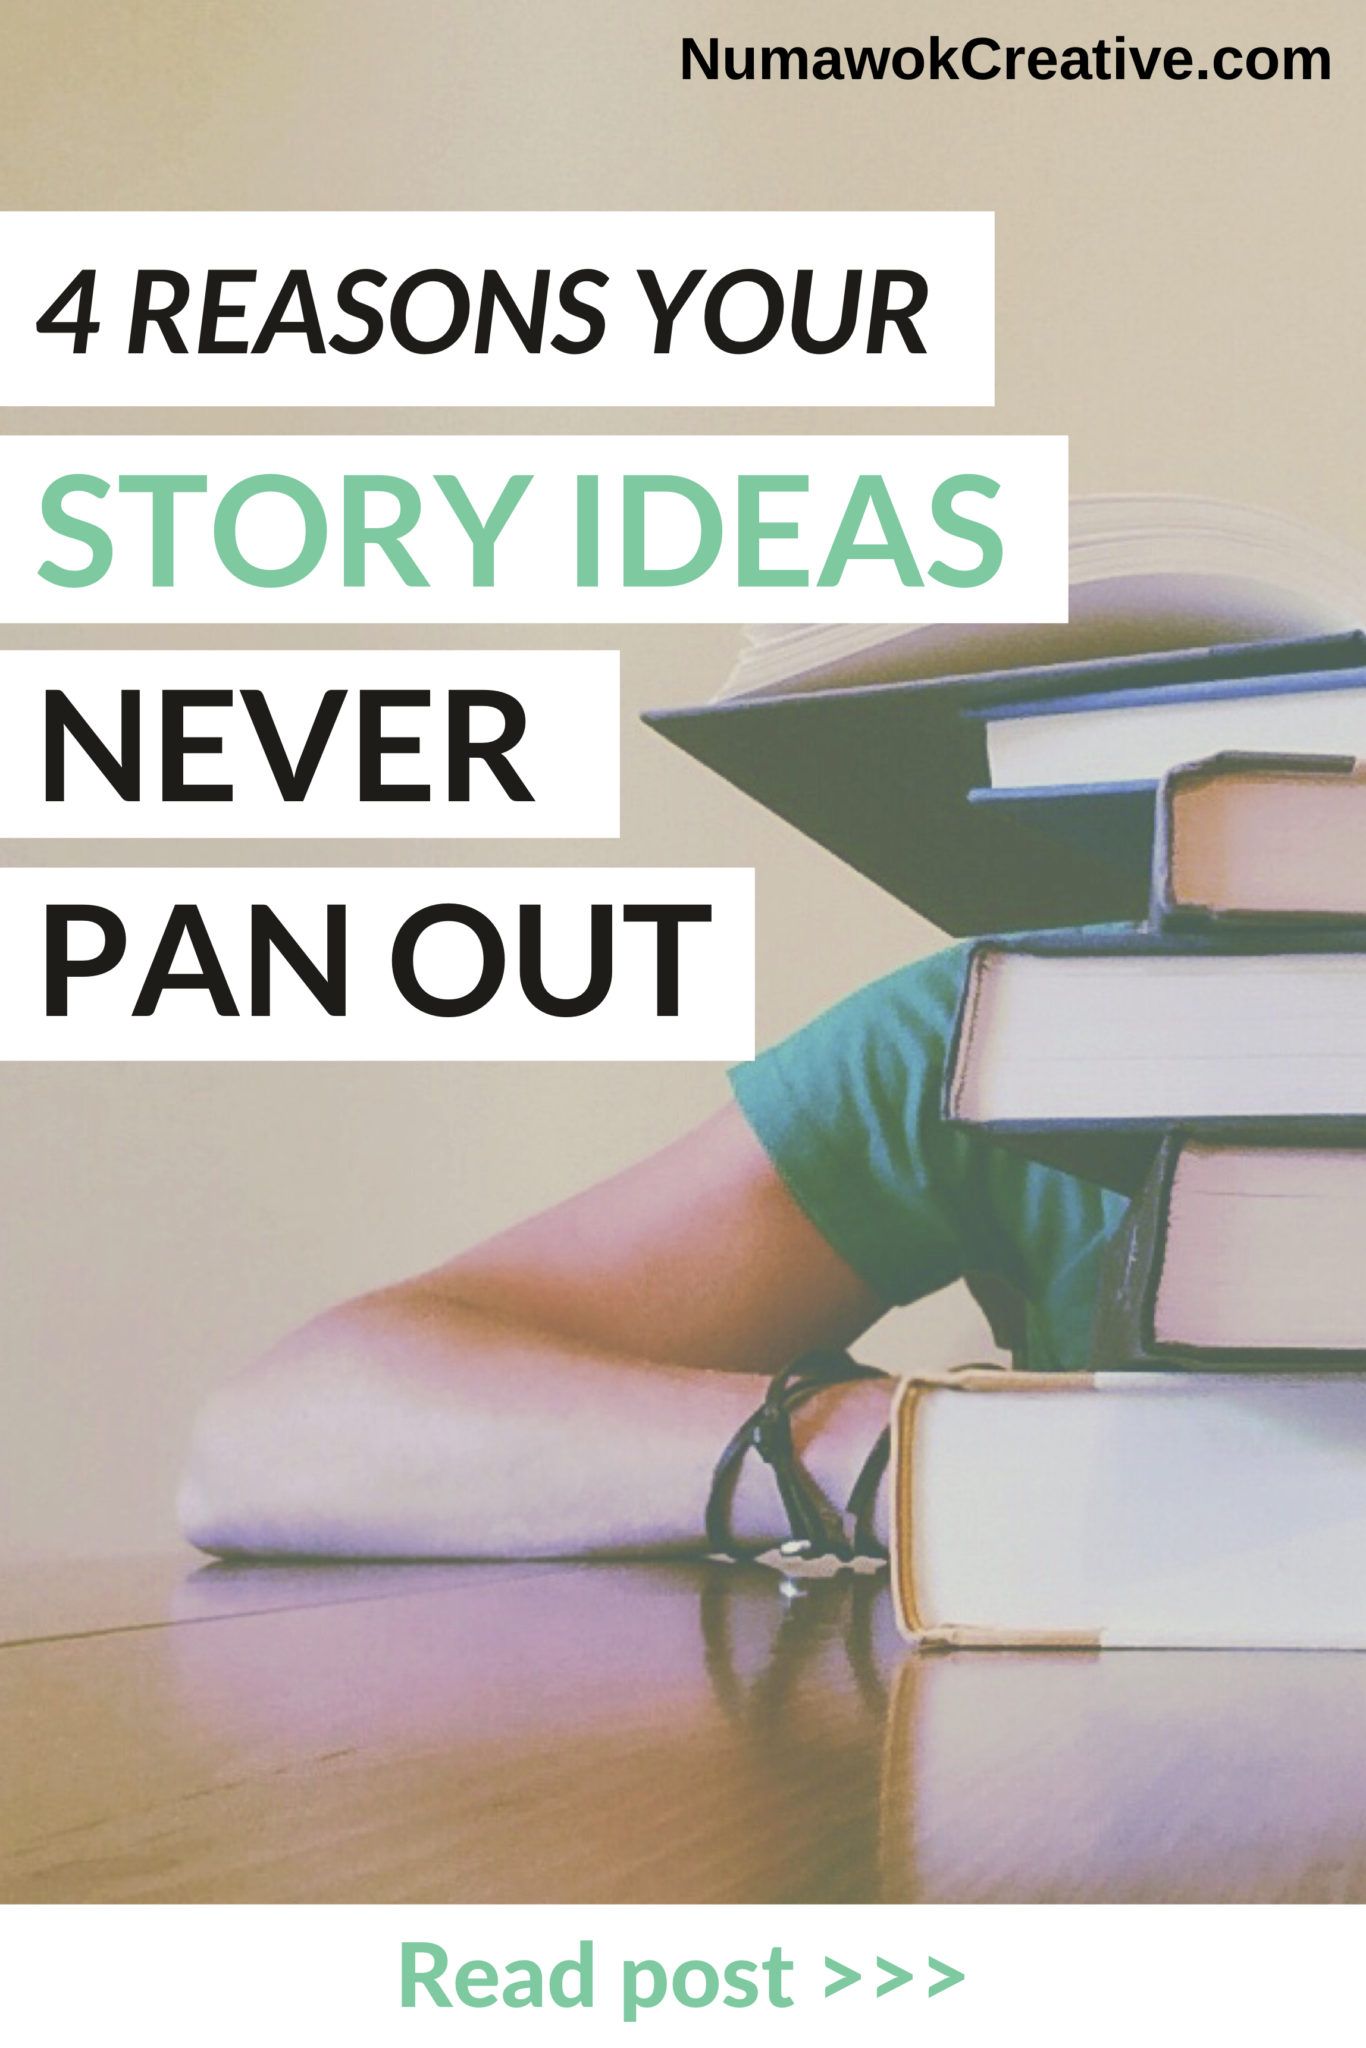 how do writers communicate ideas through stories